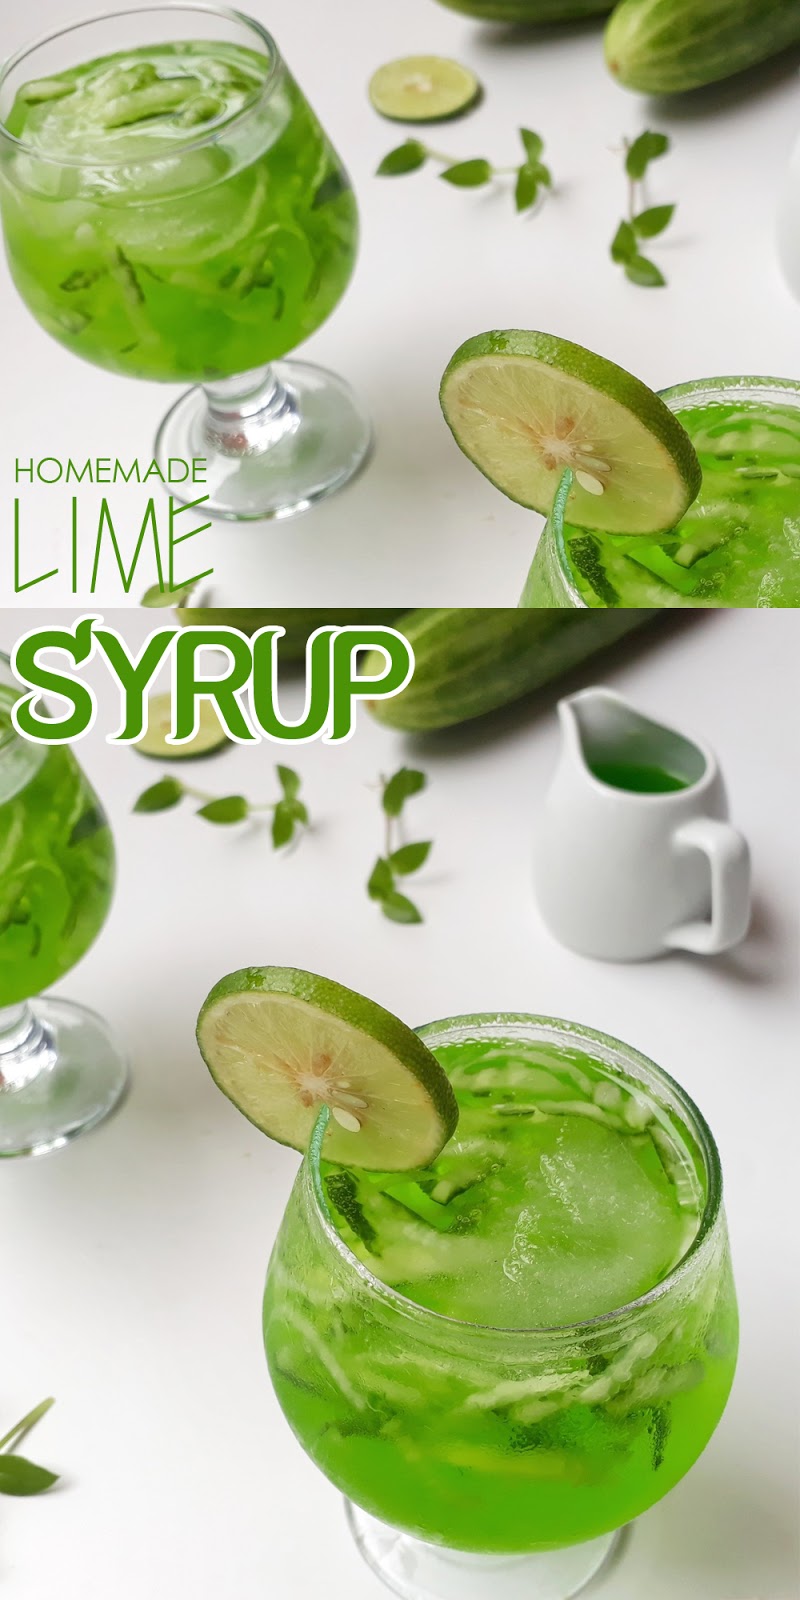 LIME SYRUP RECIPES